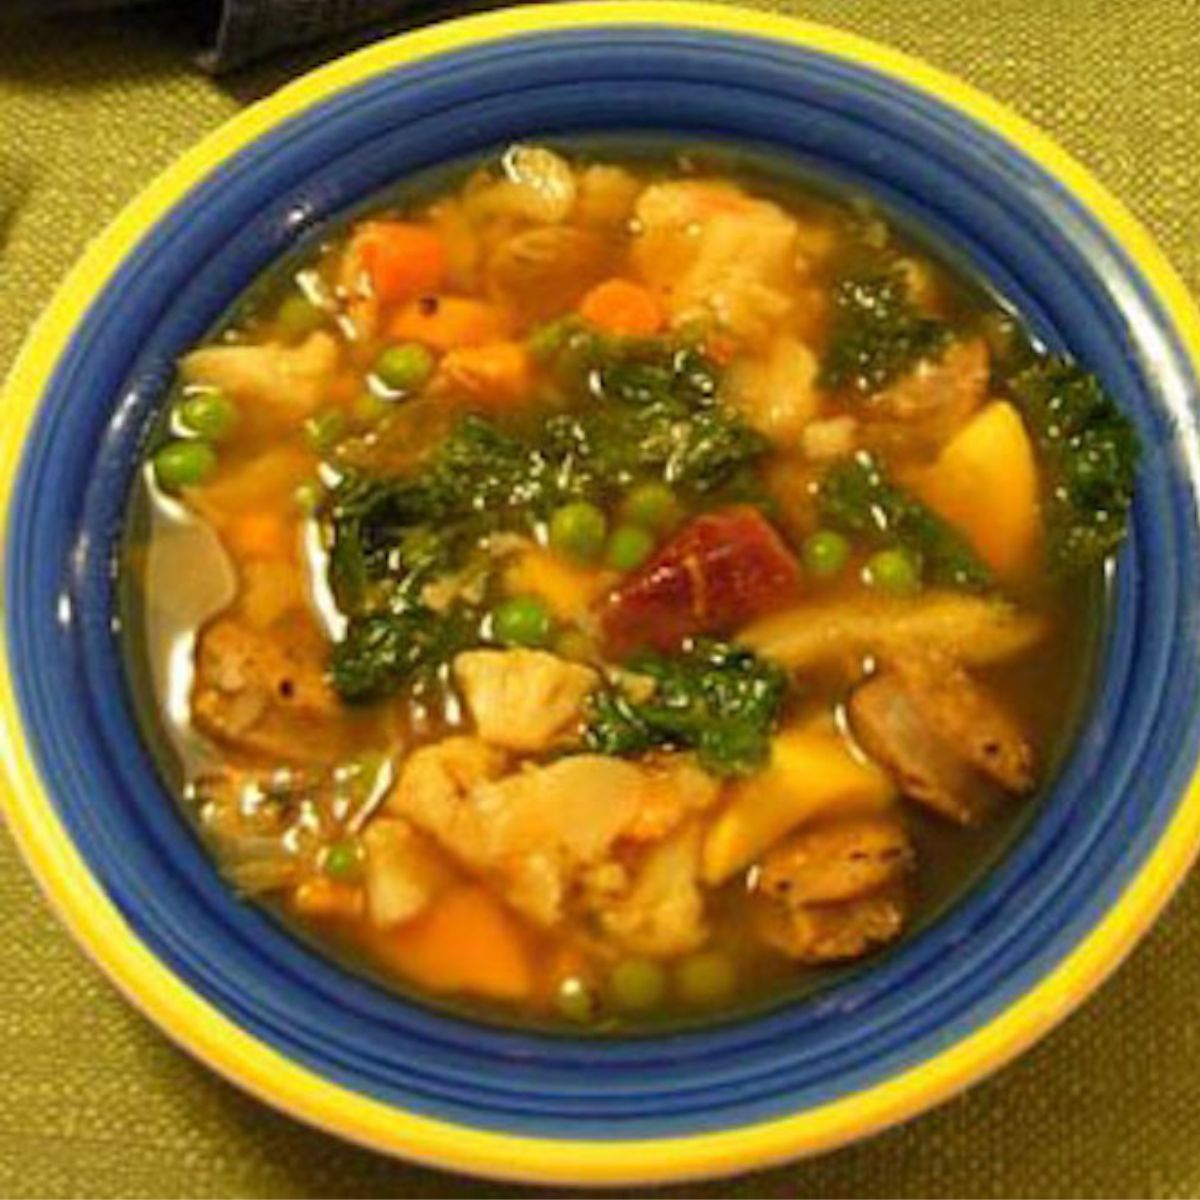 A colorful bowl with vegetable soup.